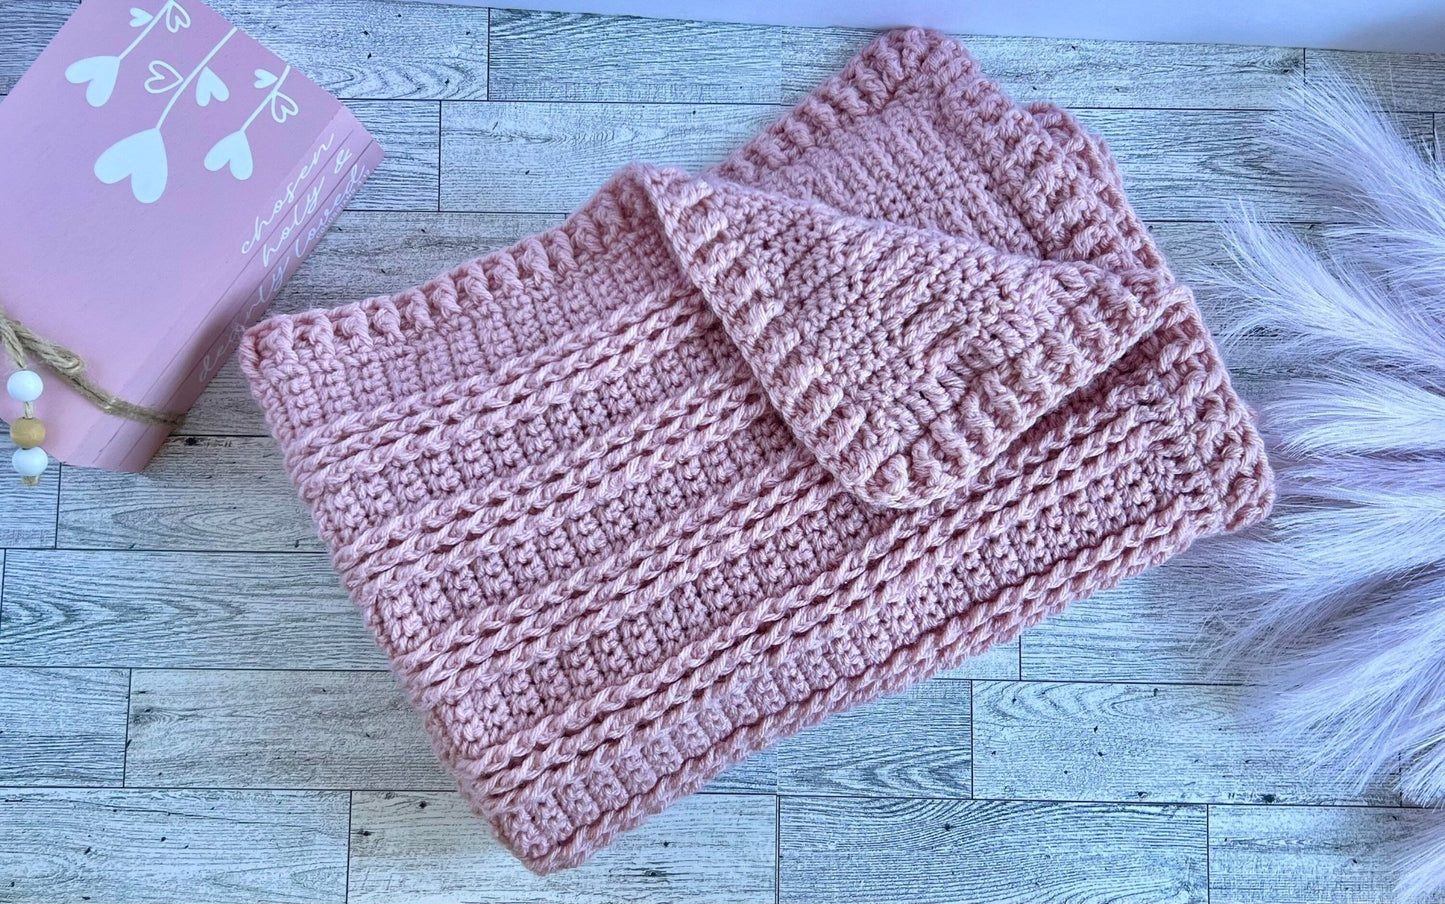 Cradle size baby blanket 31”x26”, dusty pink - blanket for baby girl - baby shower gift for baby girl, boho room decor, modern heirloom - Lilly Grace Sparkle Boutique